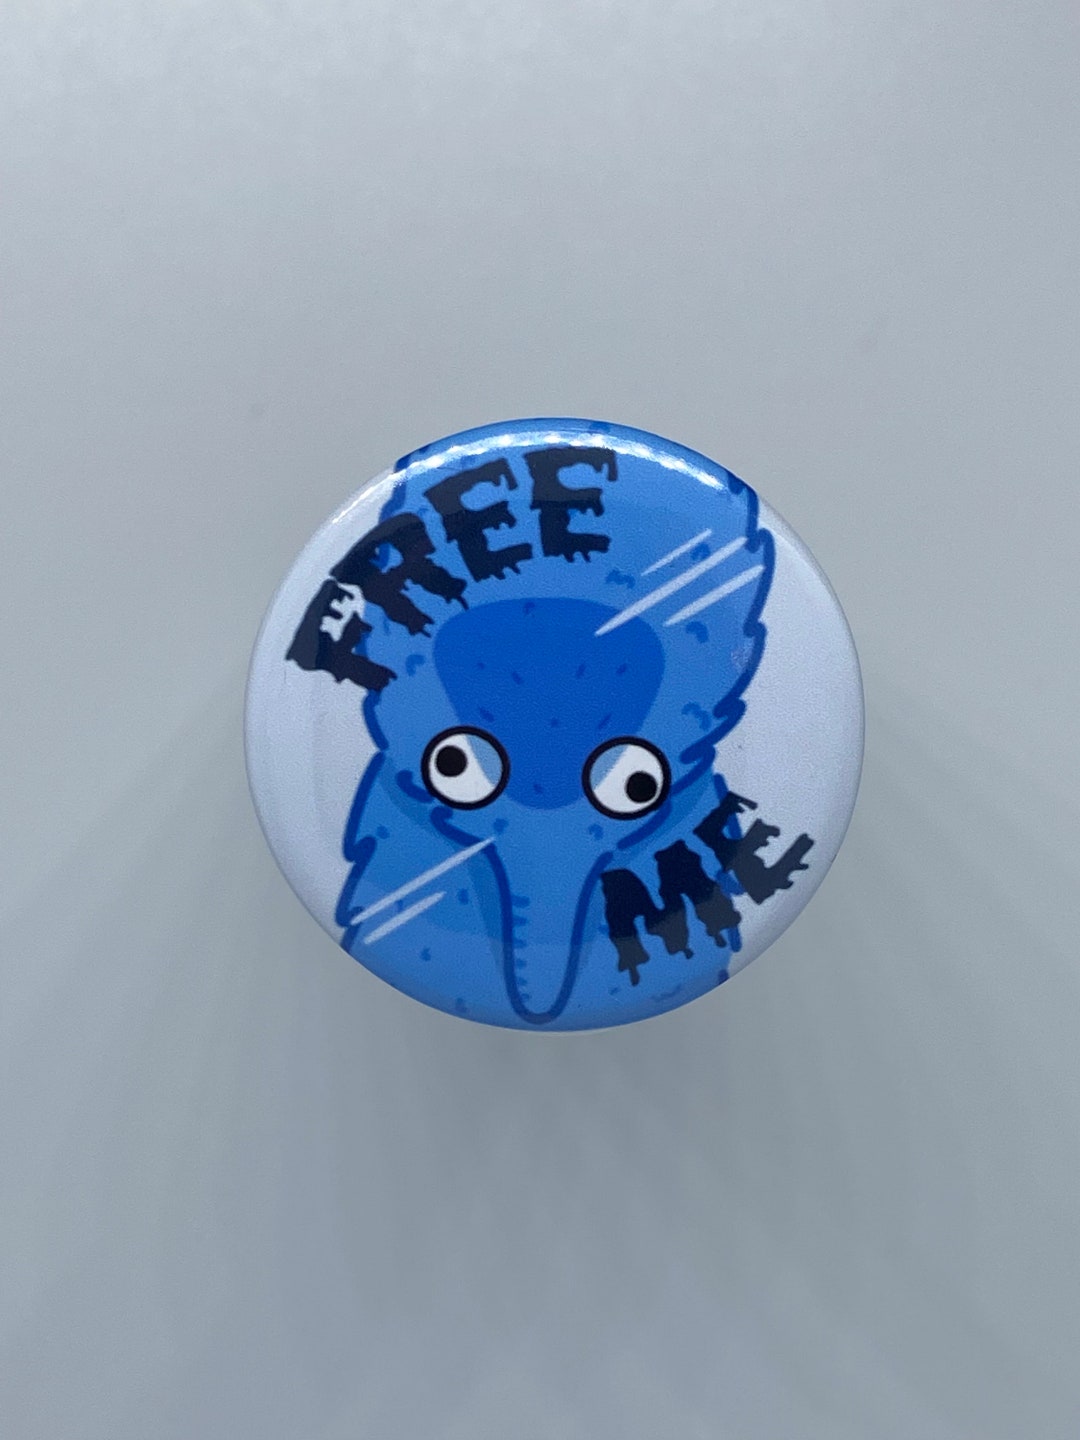 Worm on a String Funny Button Free Me Worm on a String Cursed Button Cursed  Funny Meme Button Worm on a String -  Hong Kong